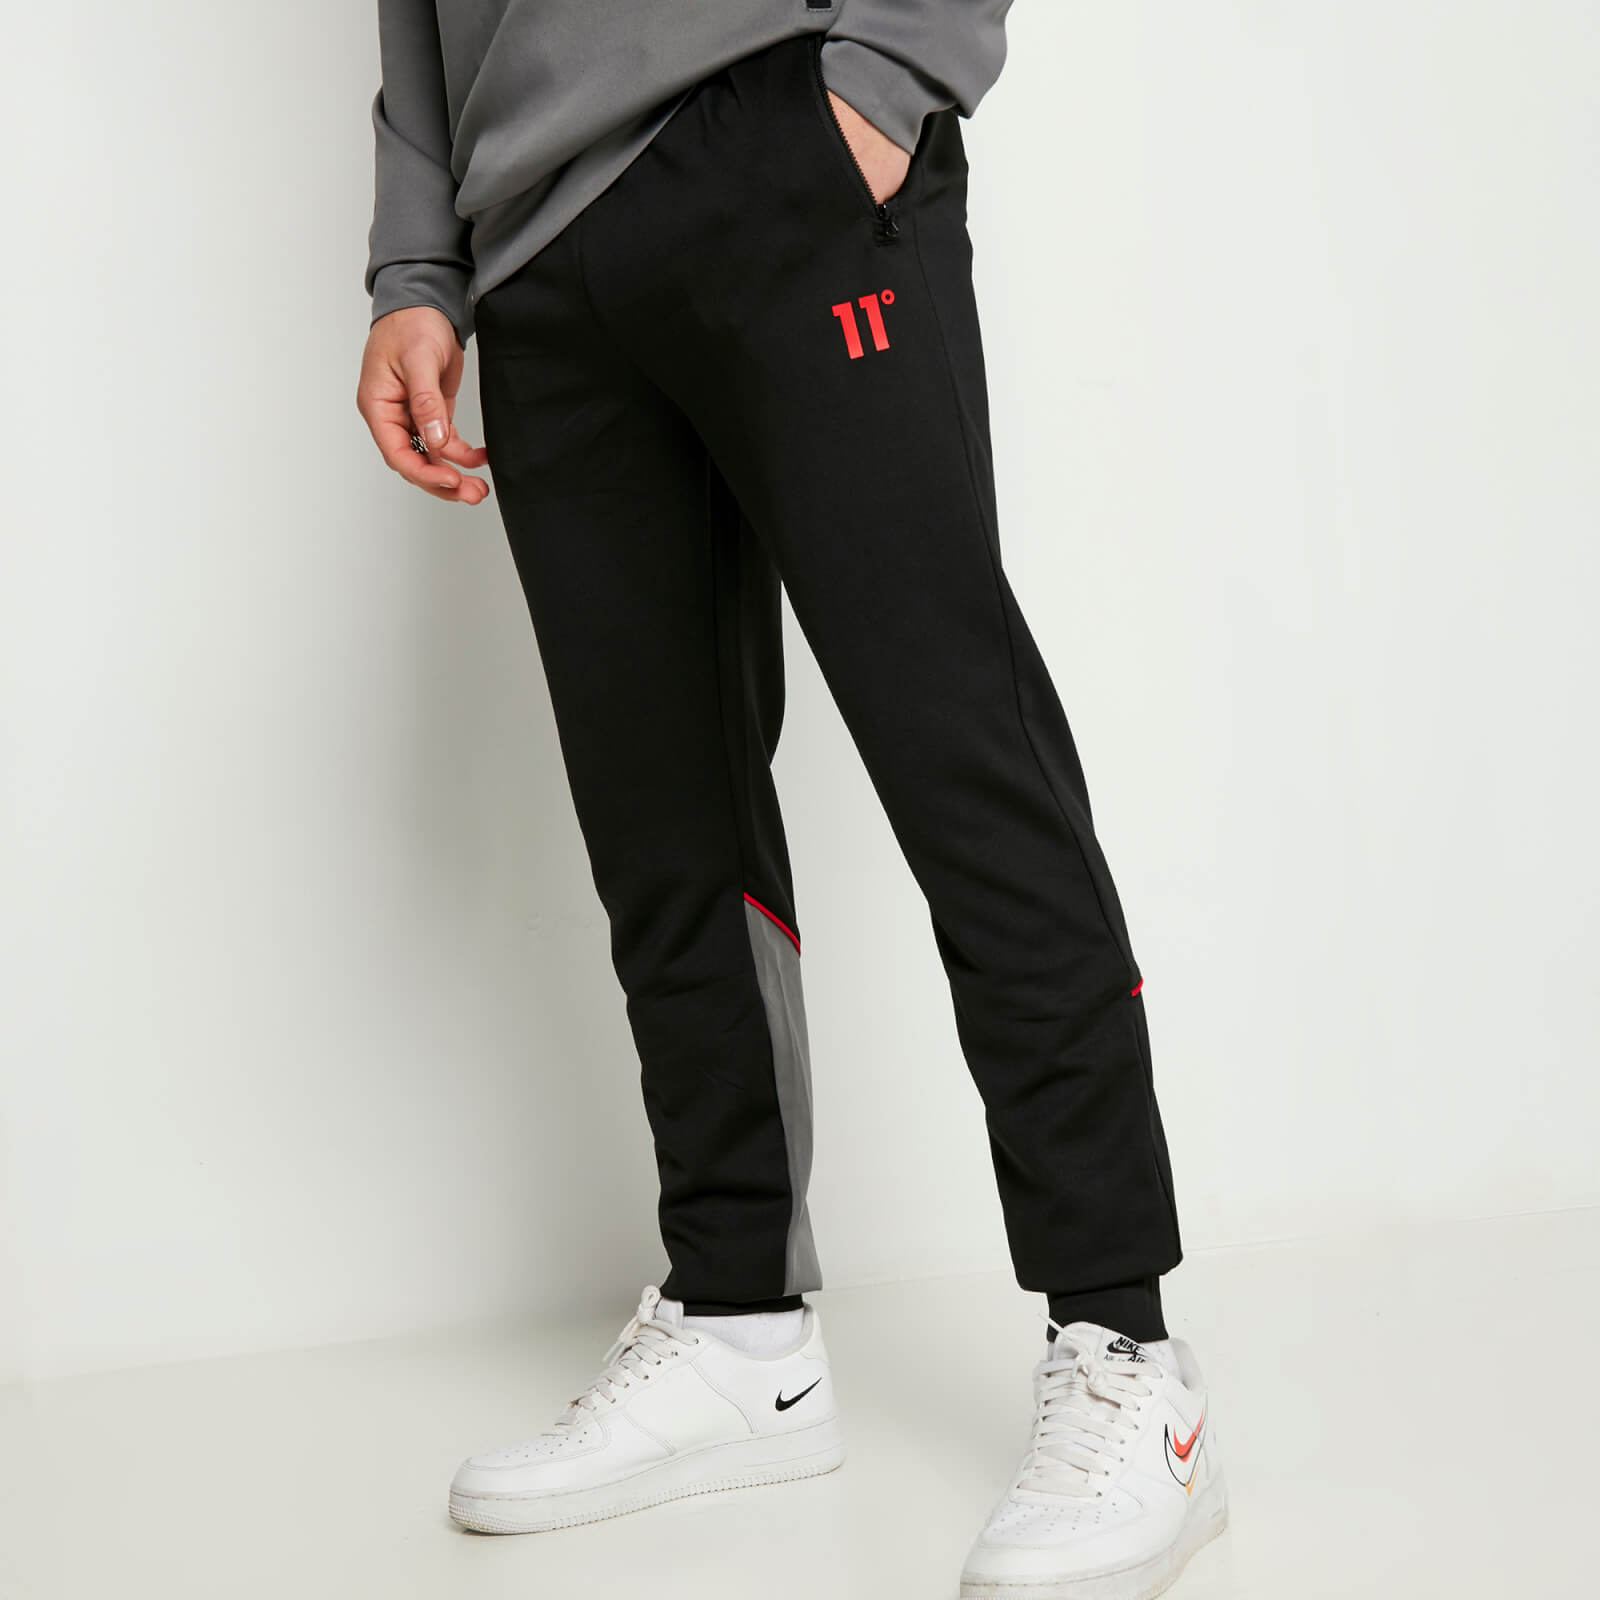 11 degrees cut and sew piped track pants – black/charcoal/ski patrol red - xs